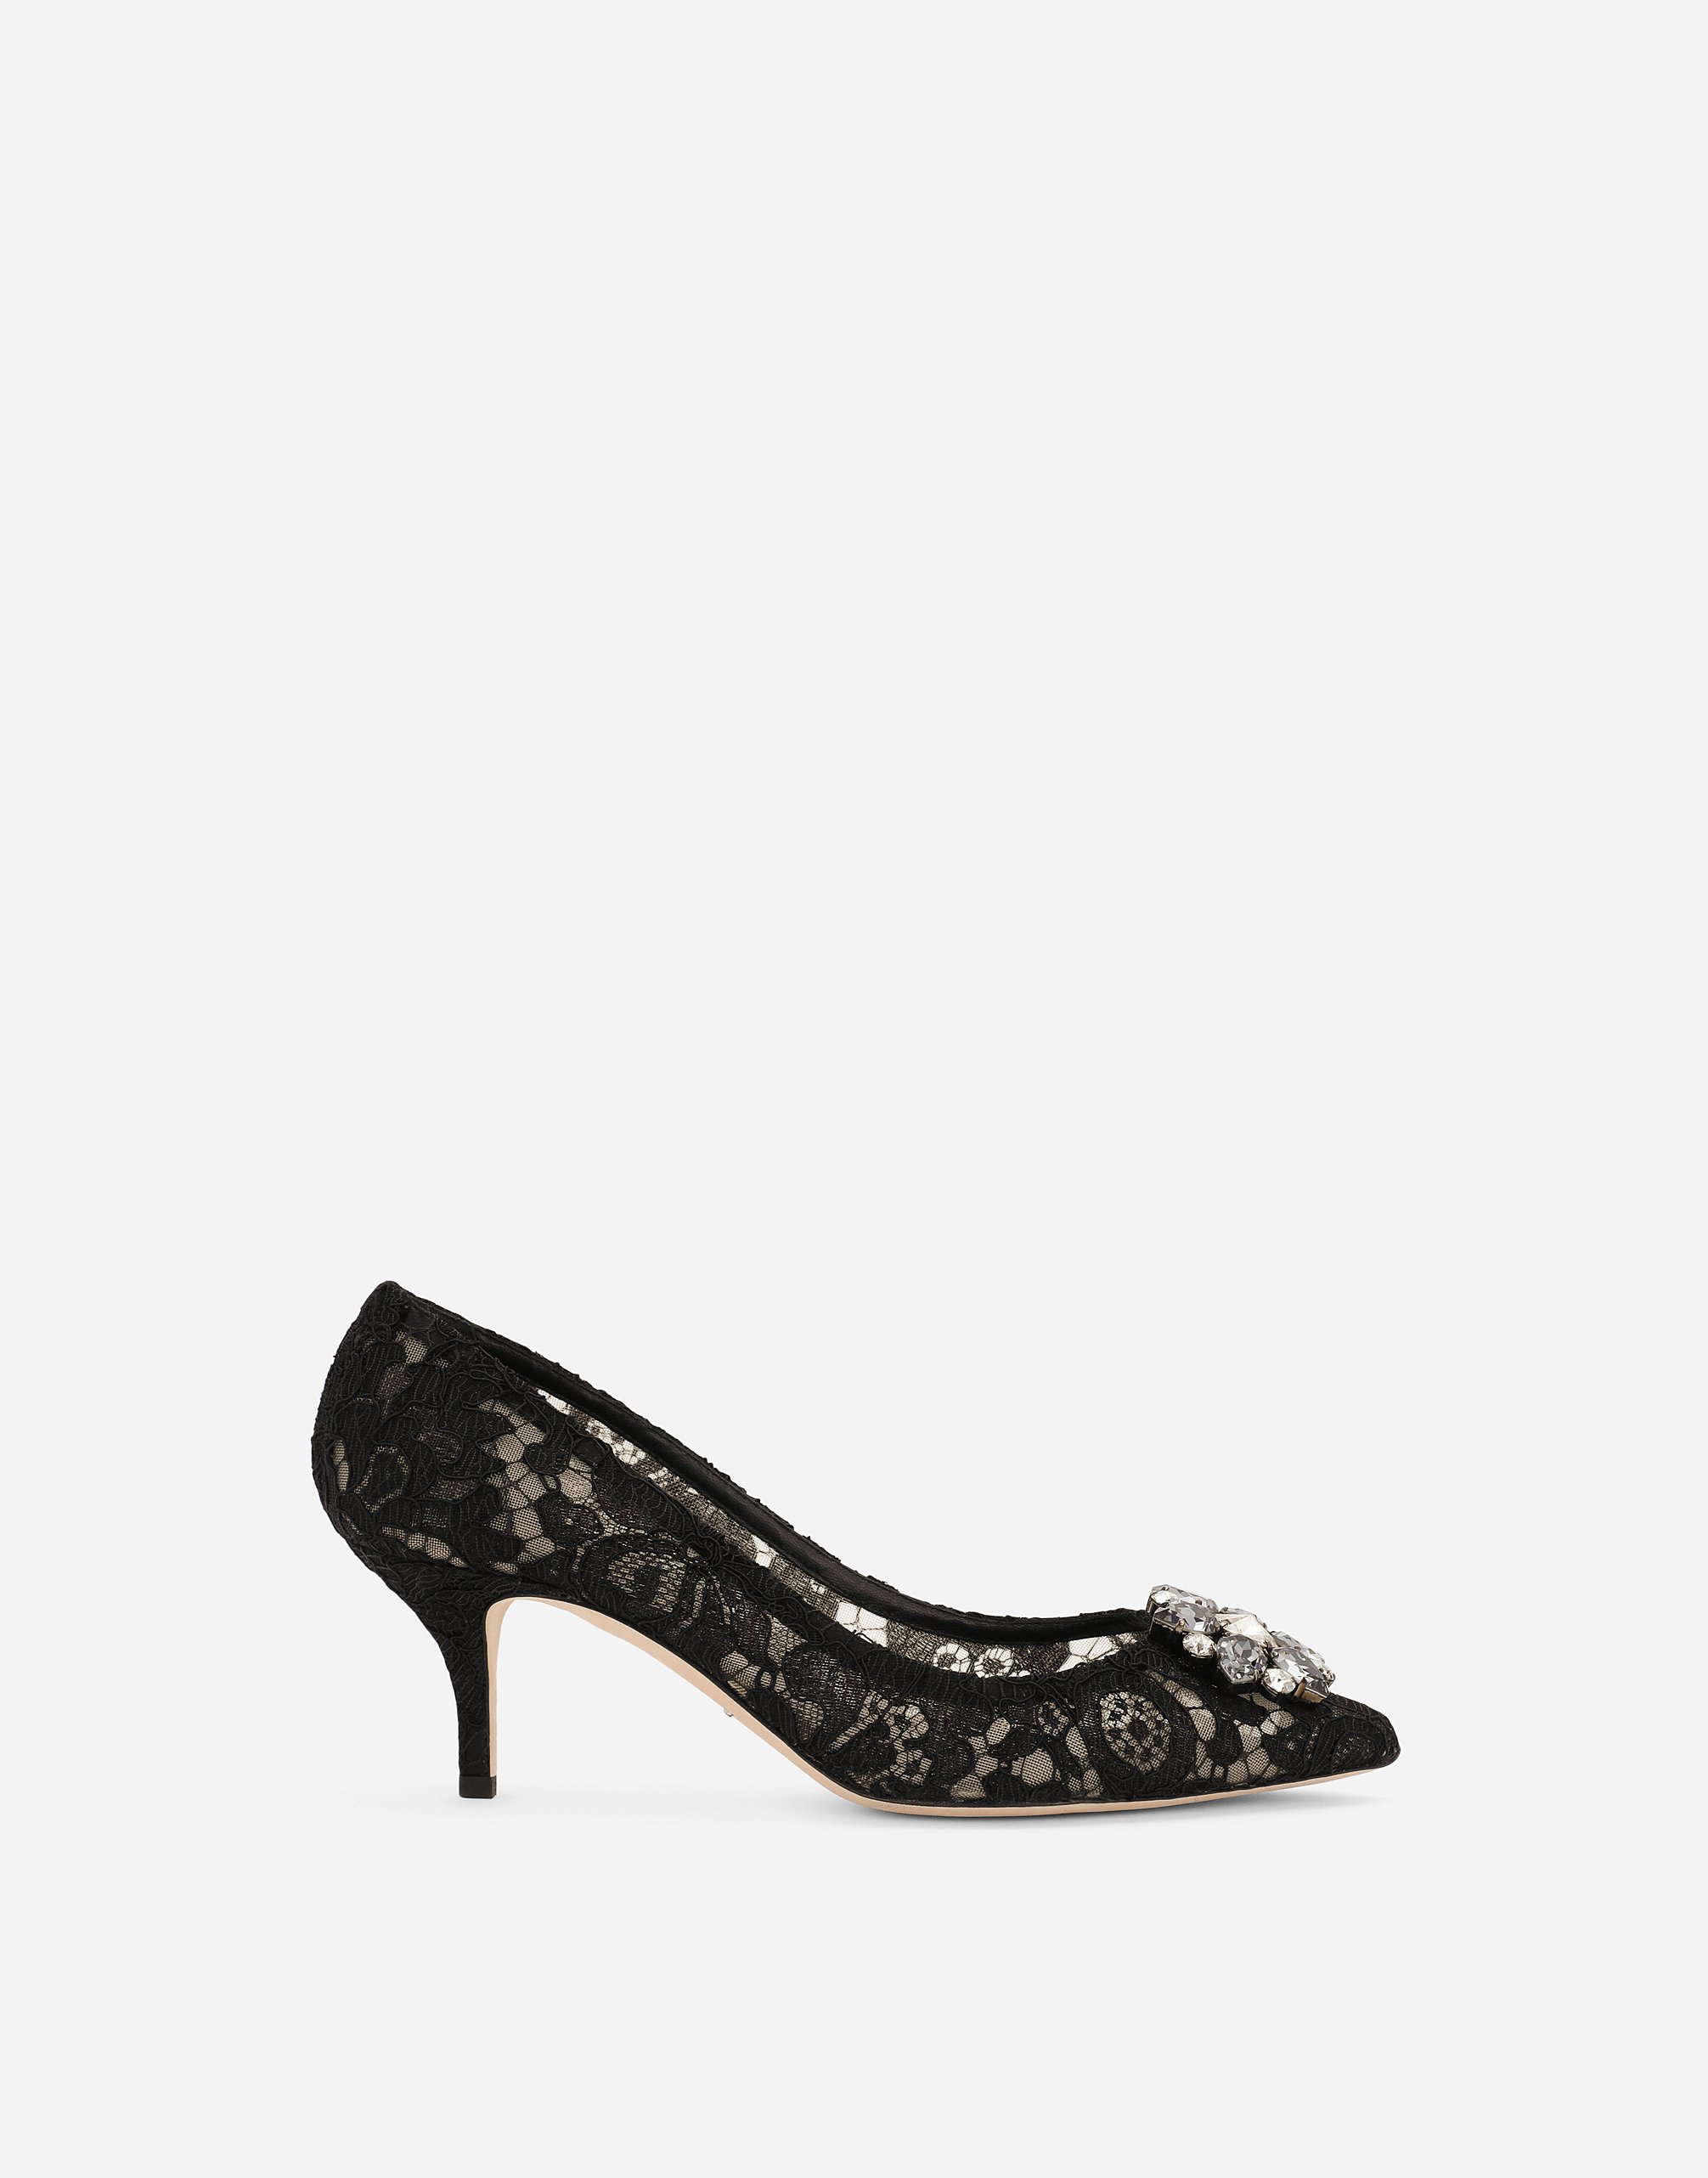 Pump In Taormina Lace With Crystals - Women | Dolce&Gabbana